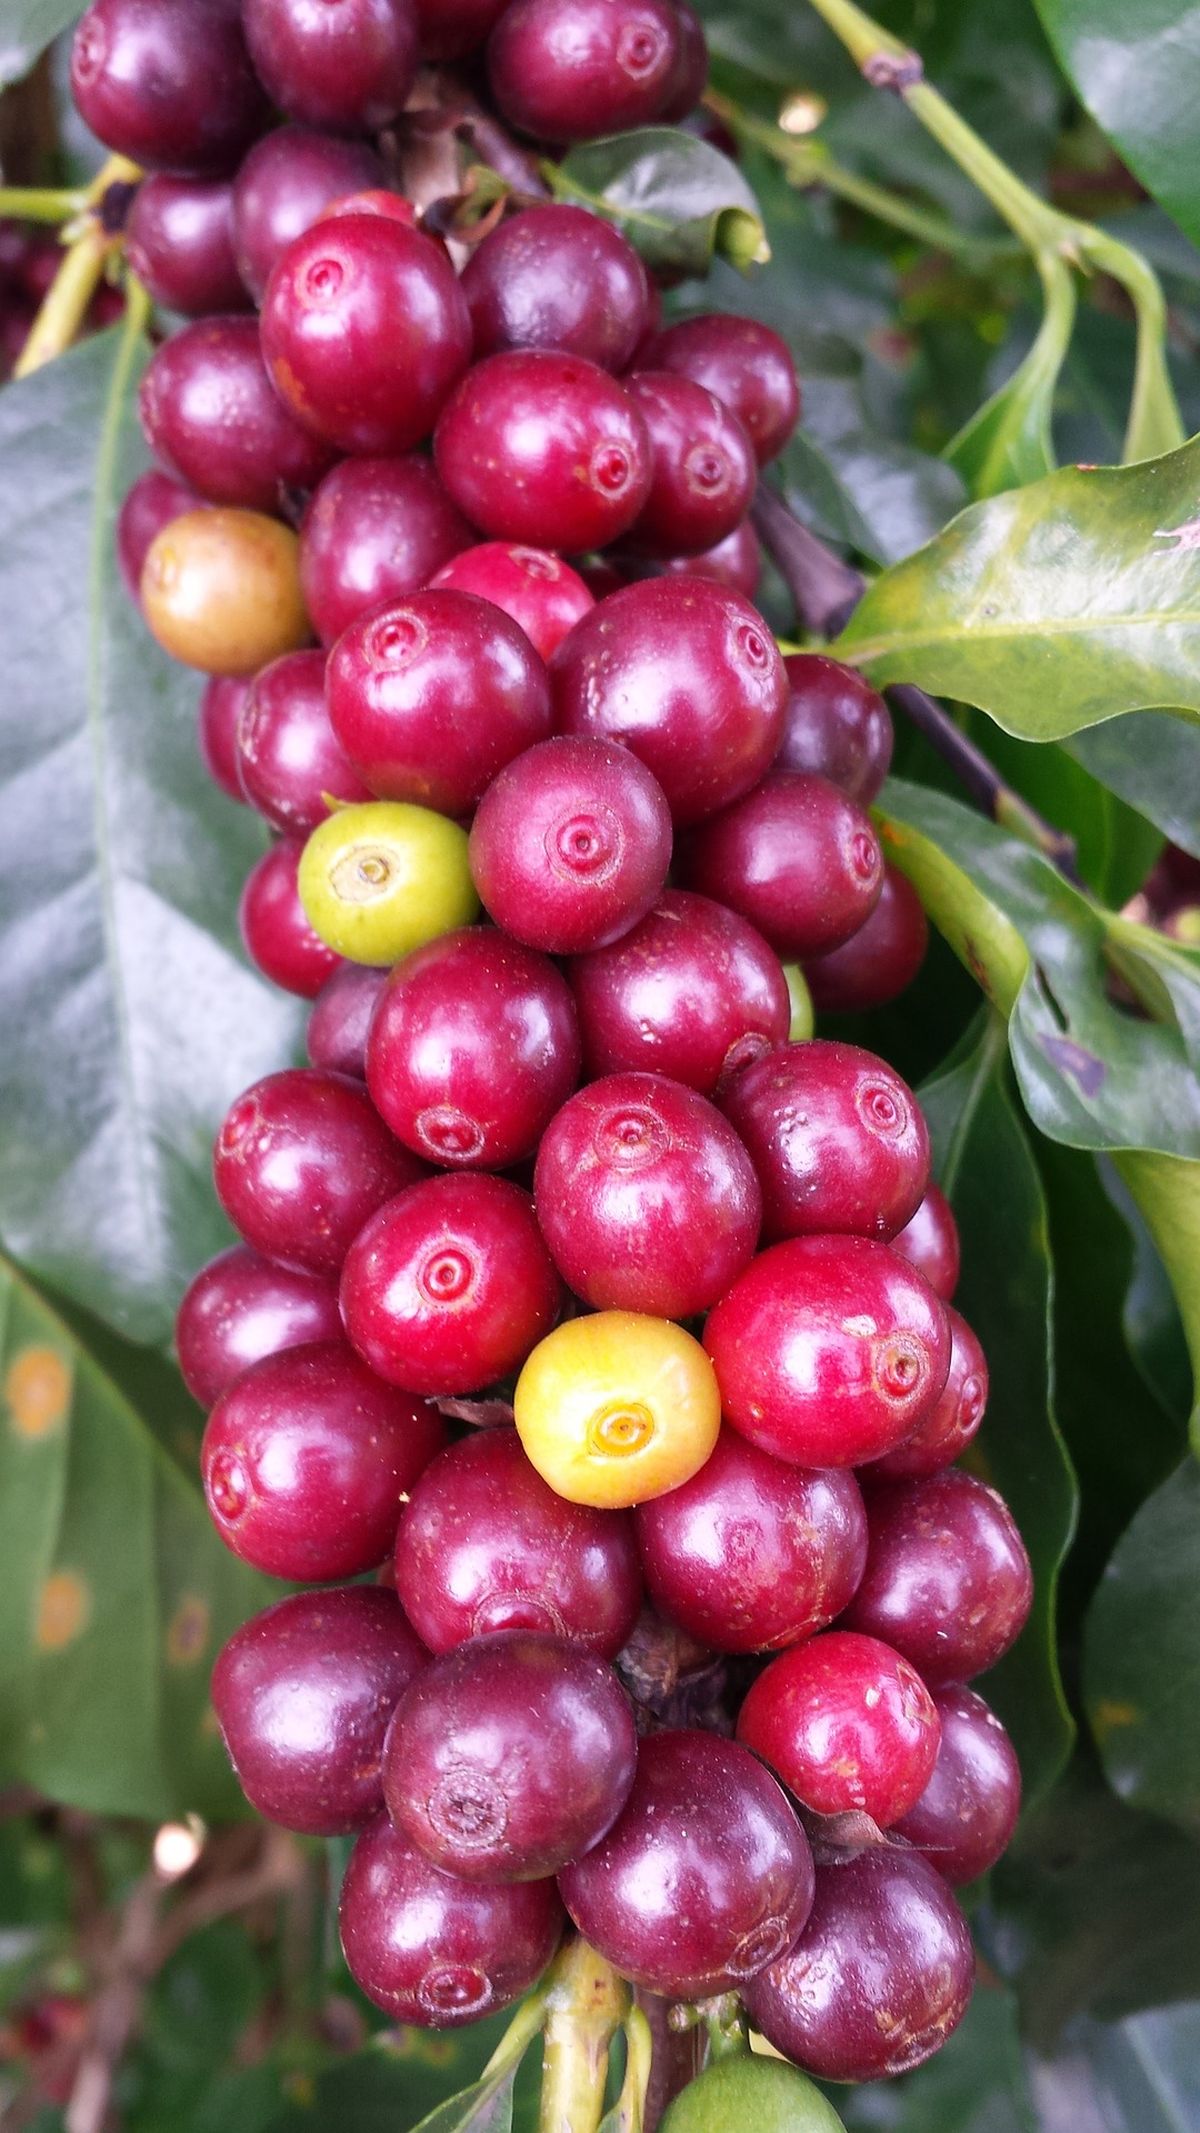 Ripened coffee beans are harvest ready. Brazil is the largest producer of coffee, followed by Vietnam and Colombia.  (Pixabay)